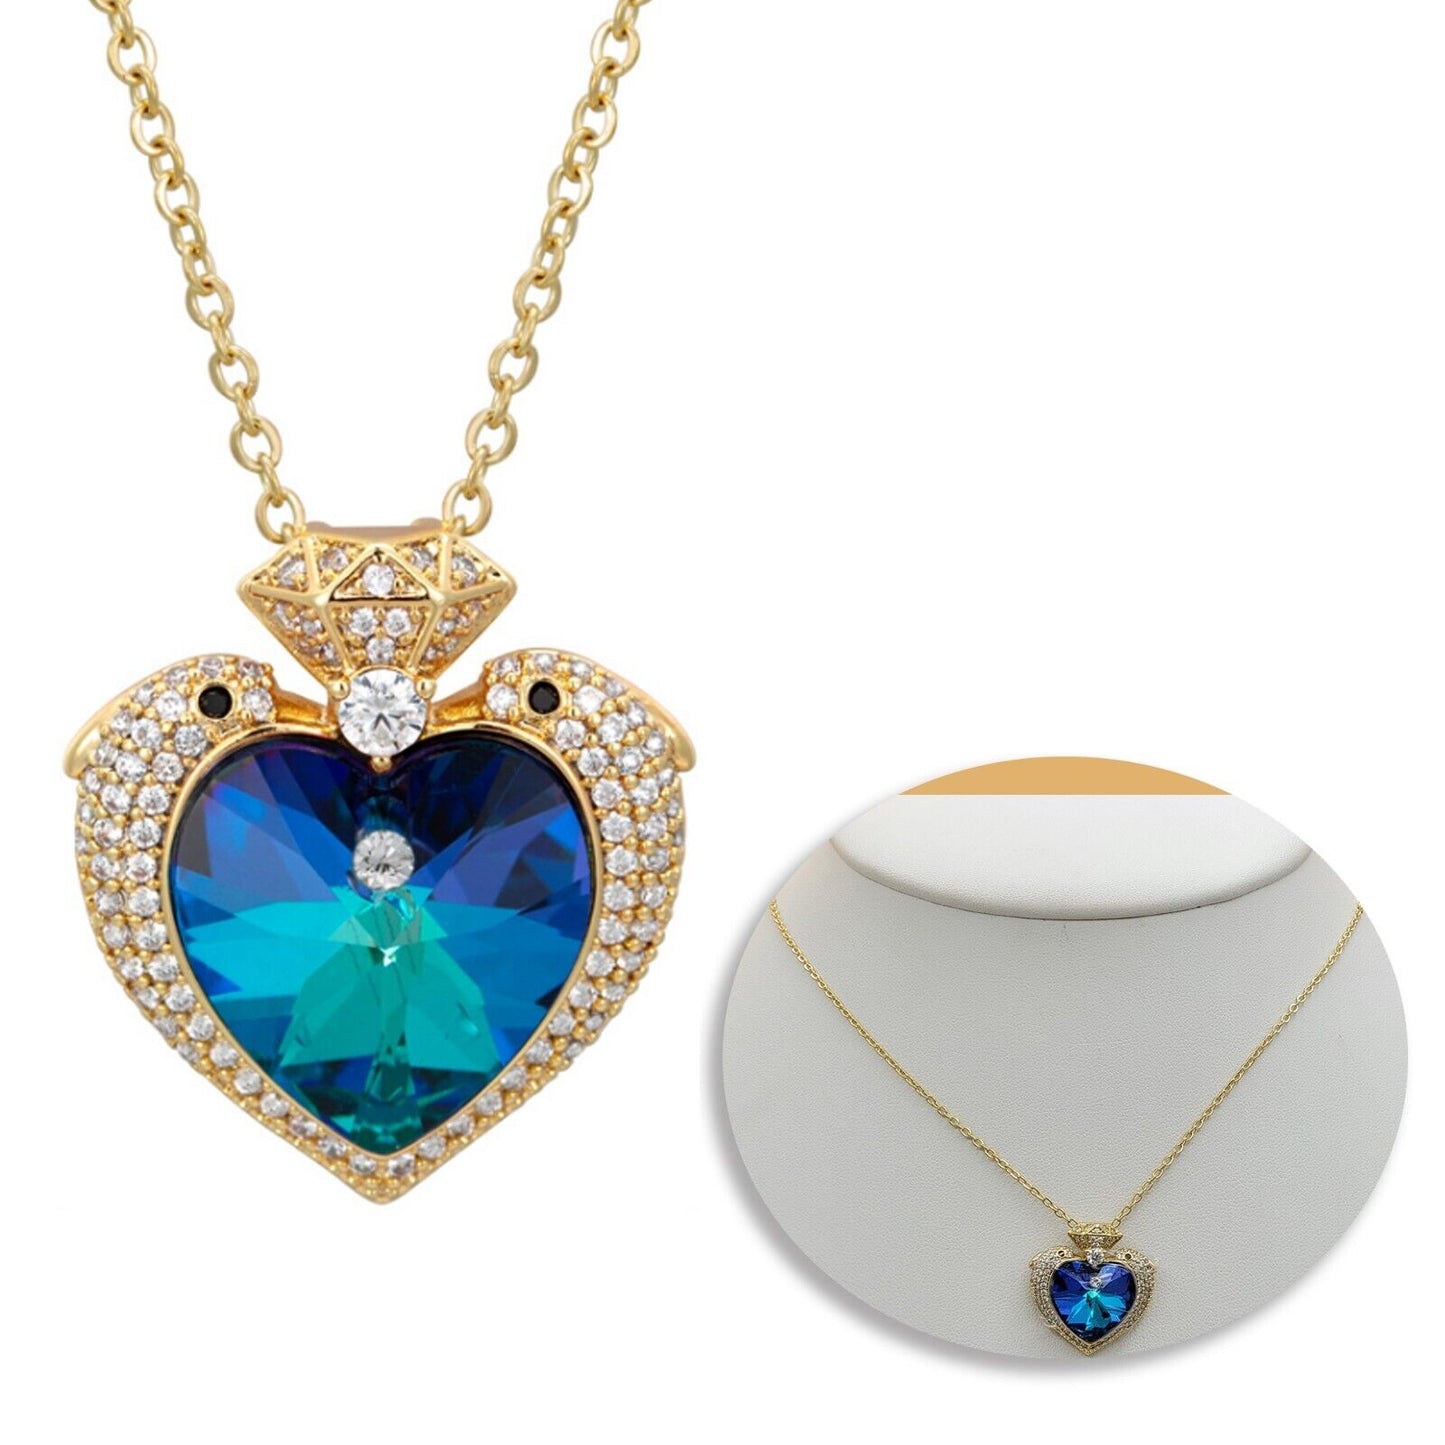 Necklaces - 14K Gold Plated. Blue Crystal Dolphins Heart Pendant & Chain.